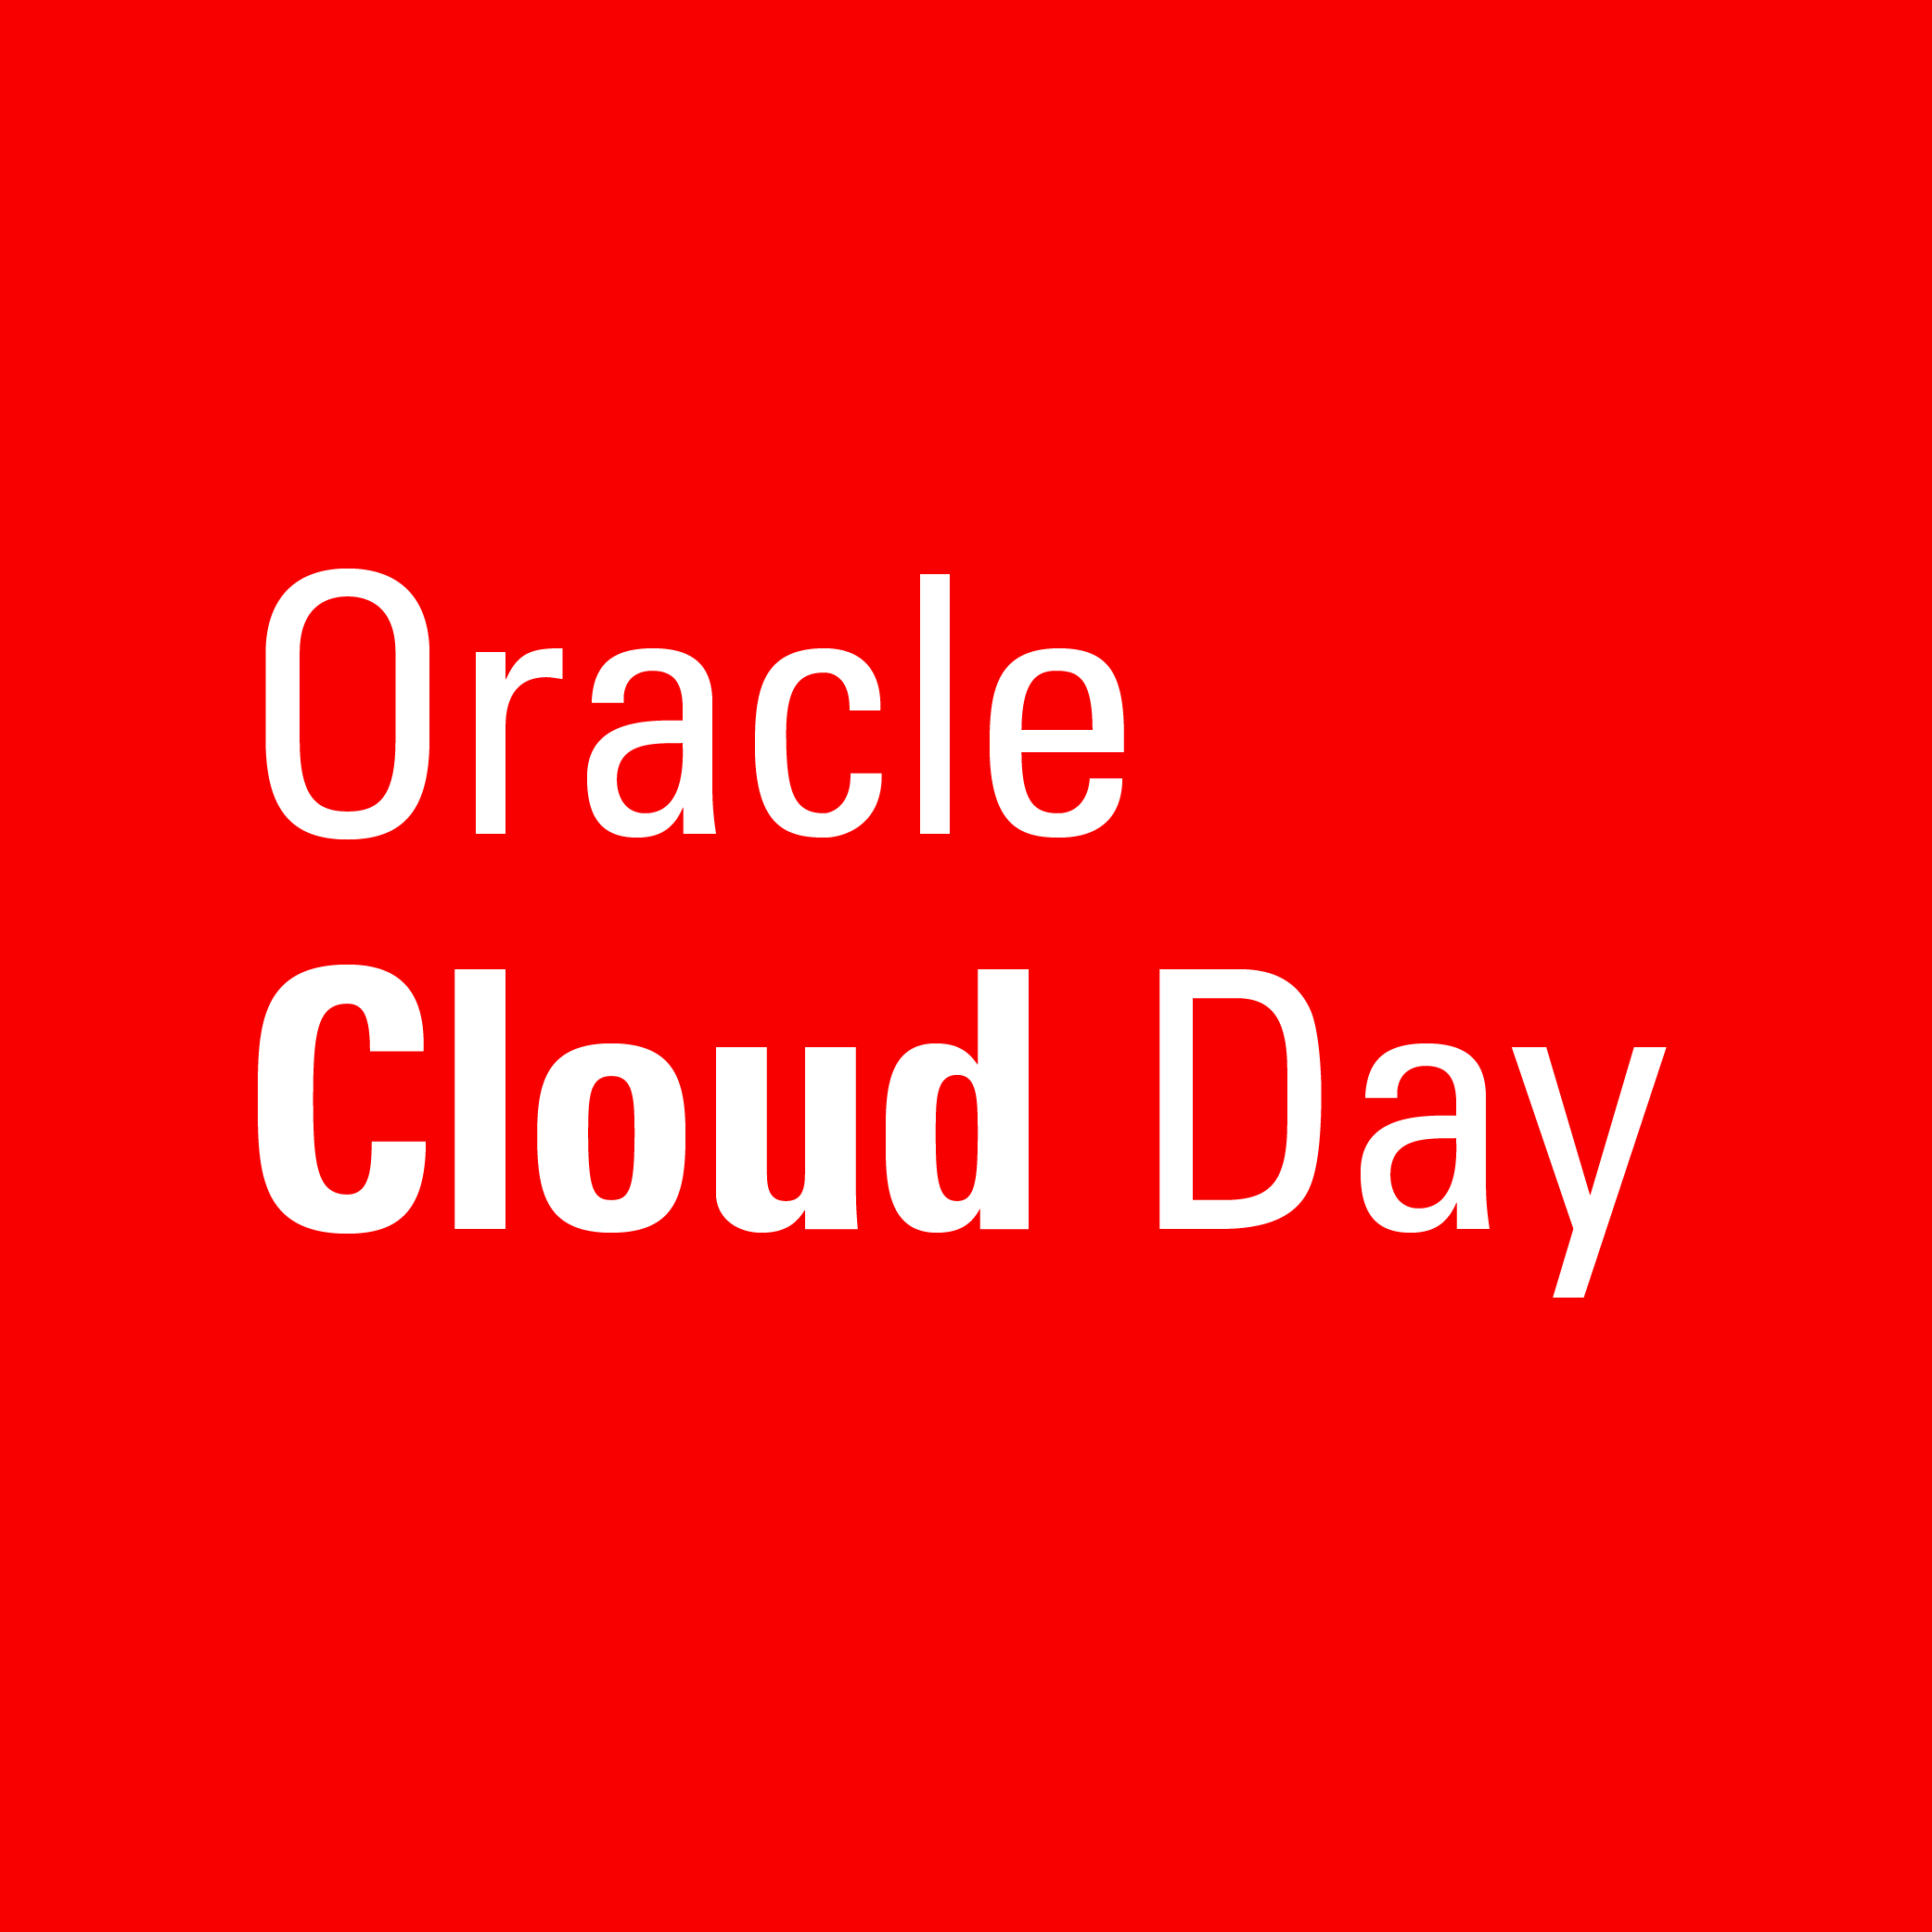 “Your Tomorrow, Today”: l’innovazione digitale a Oracle Cloud Day 2018